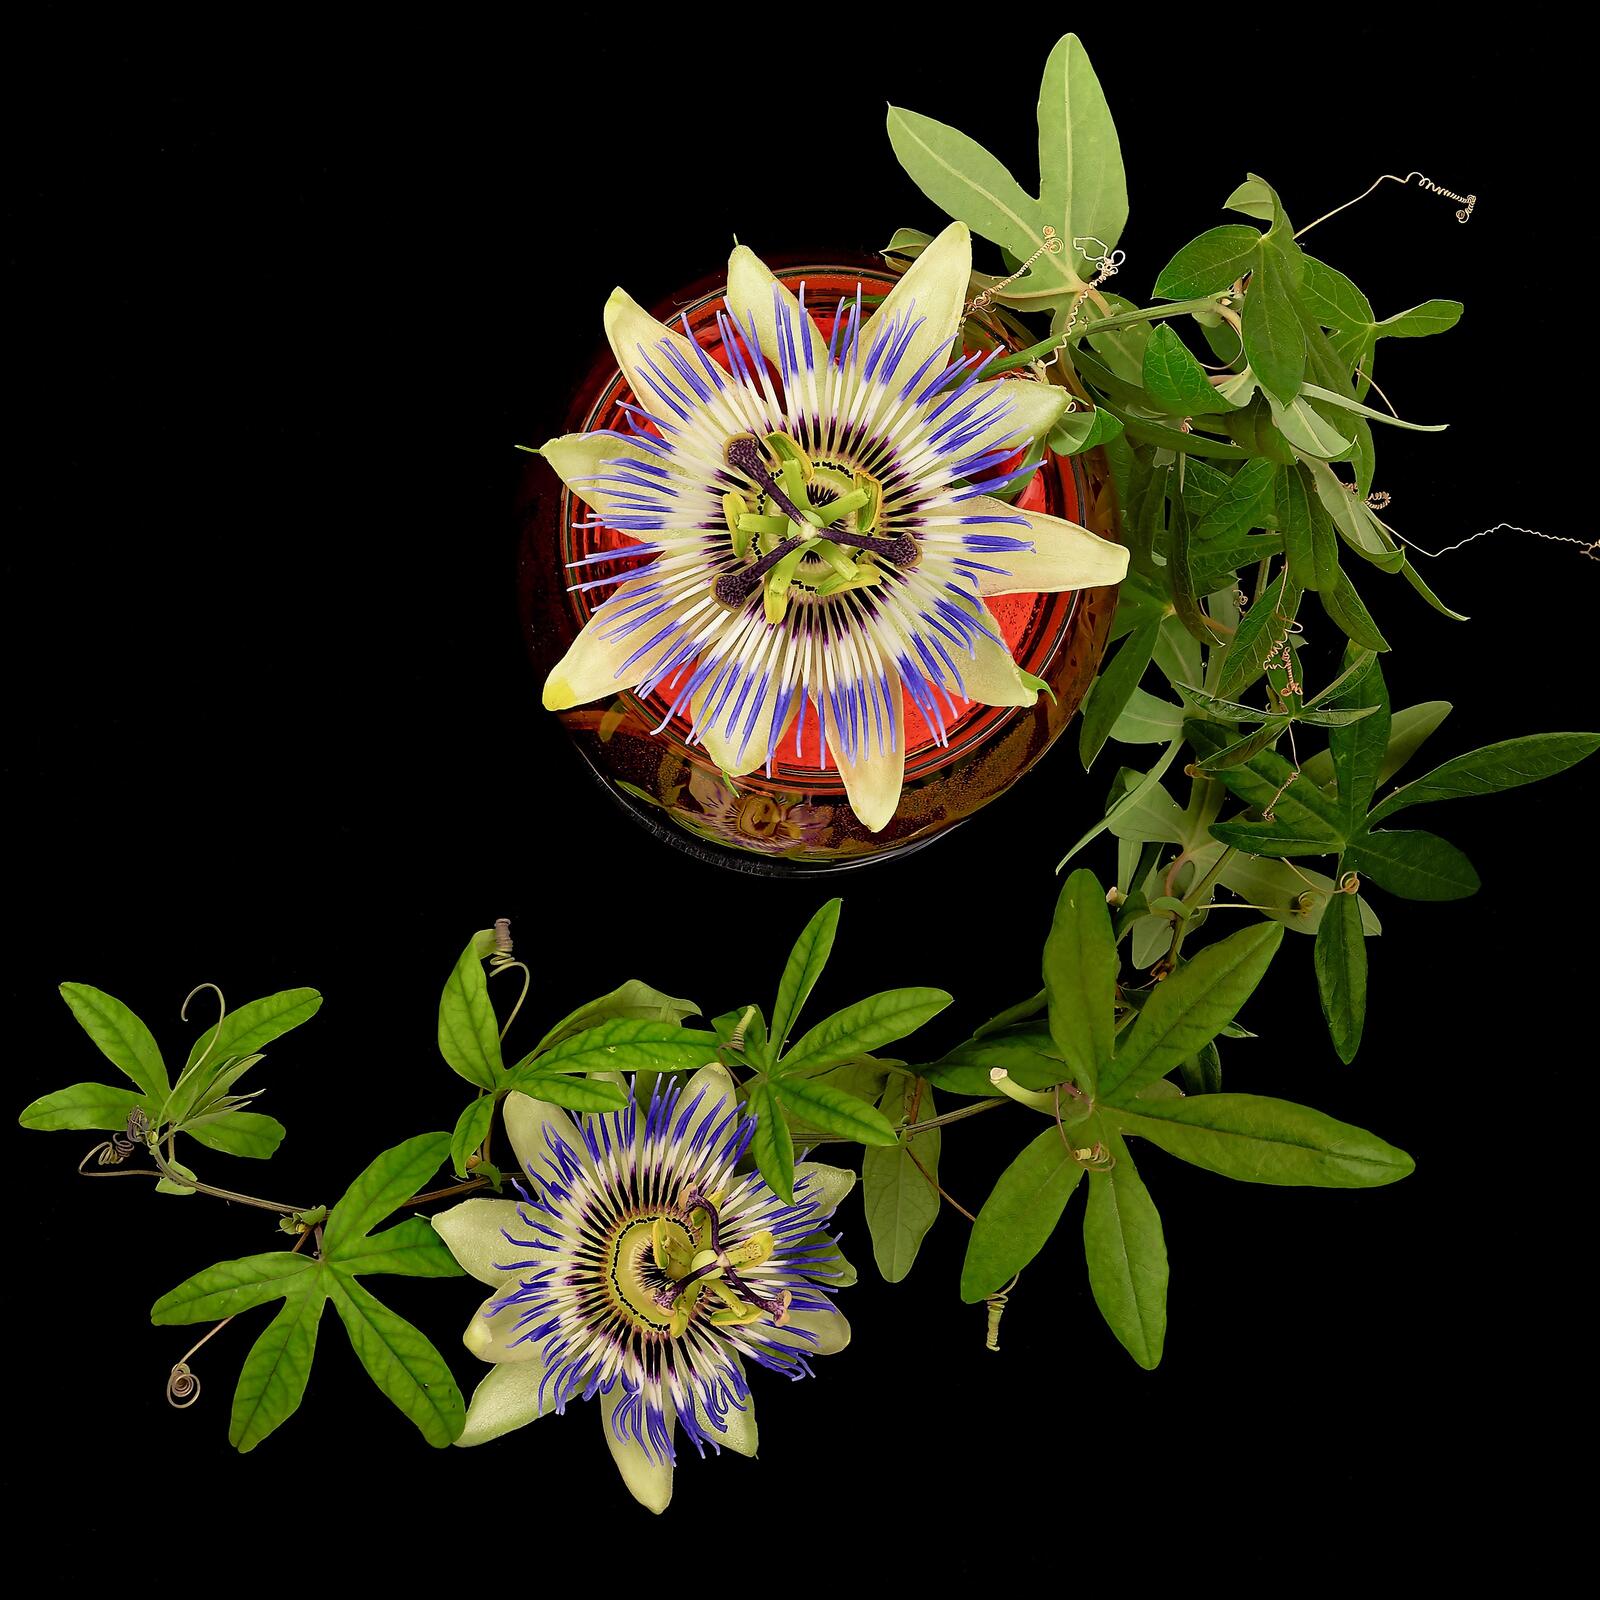 Wallpapers Passionflower flowers Pasionflower on the desktop